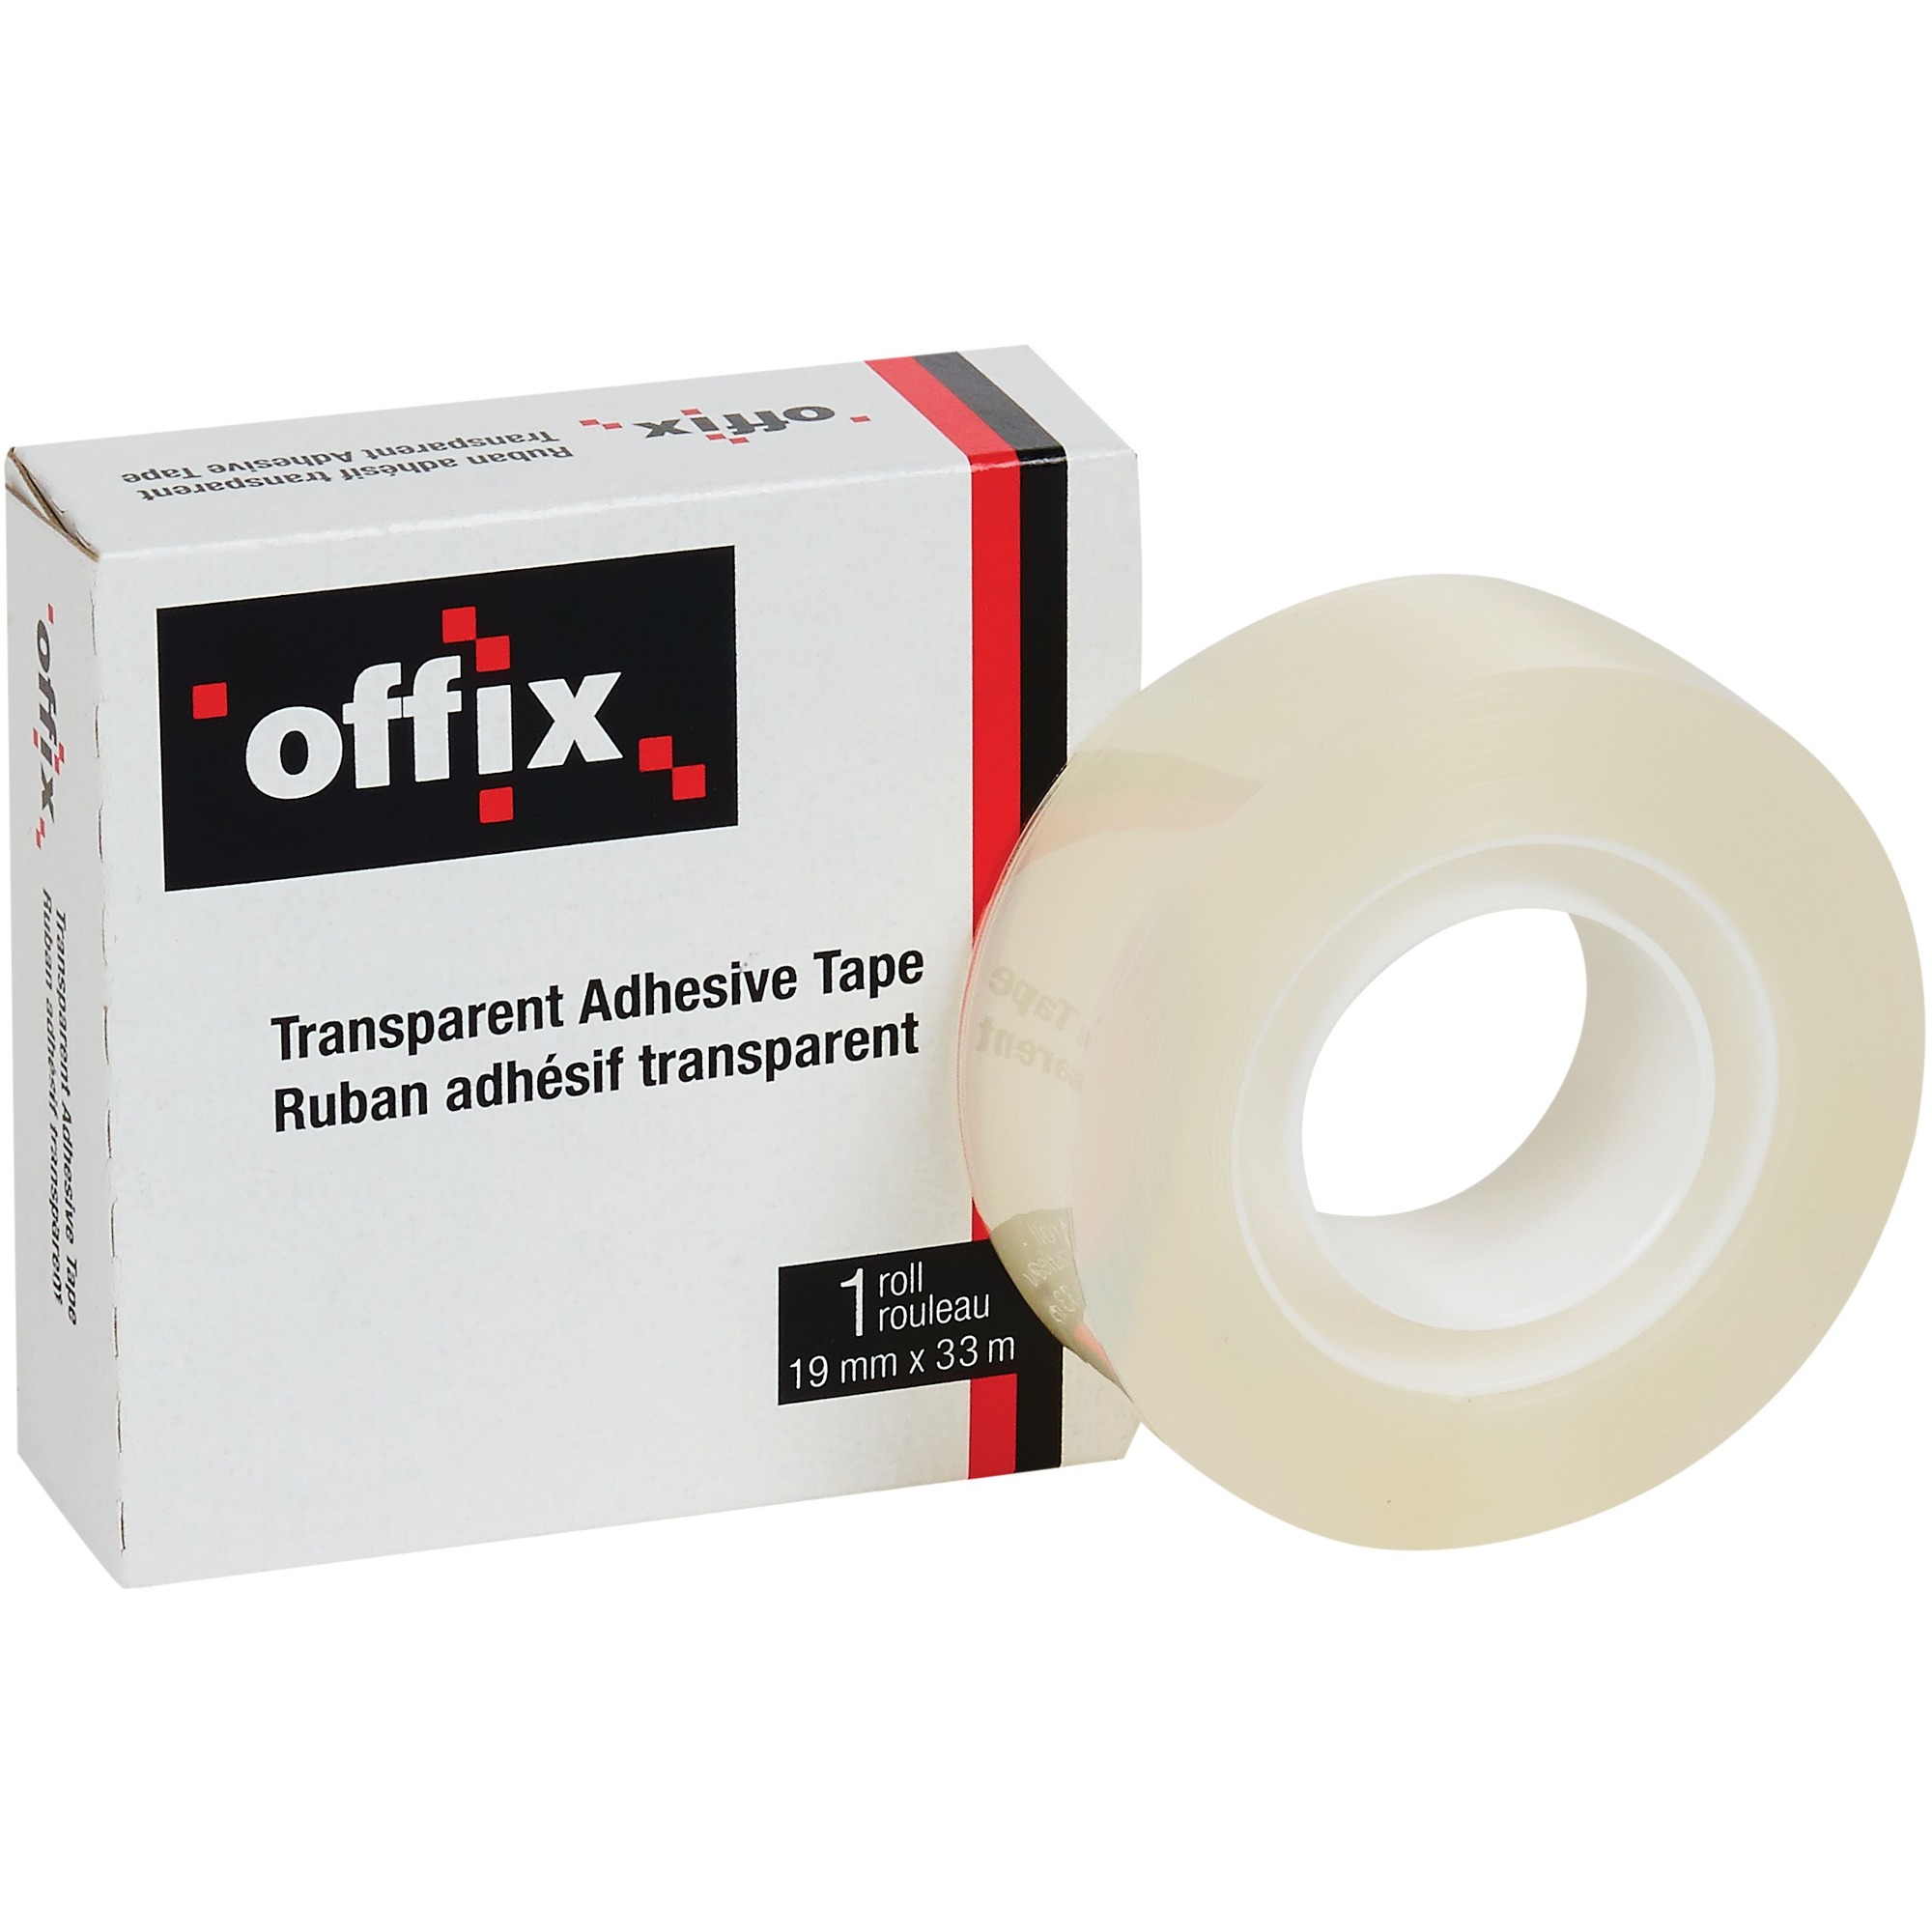 Offix Transparent Adhesive Tape 36.1 yd (33 m) Length x 0.75" (19 mm) Width - Each